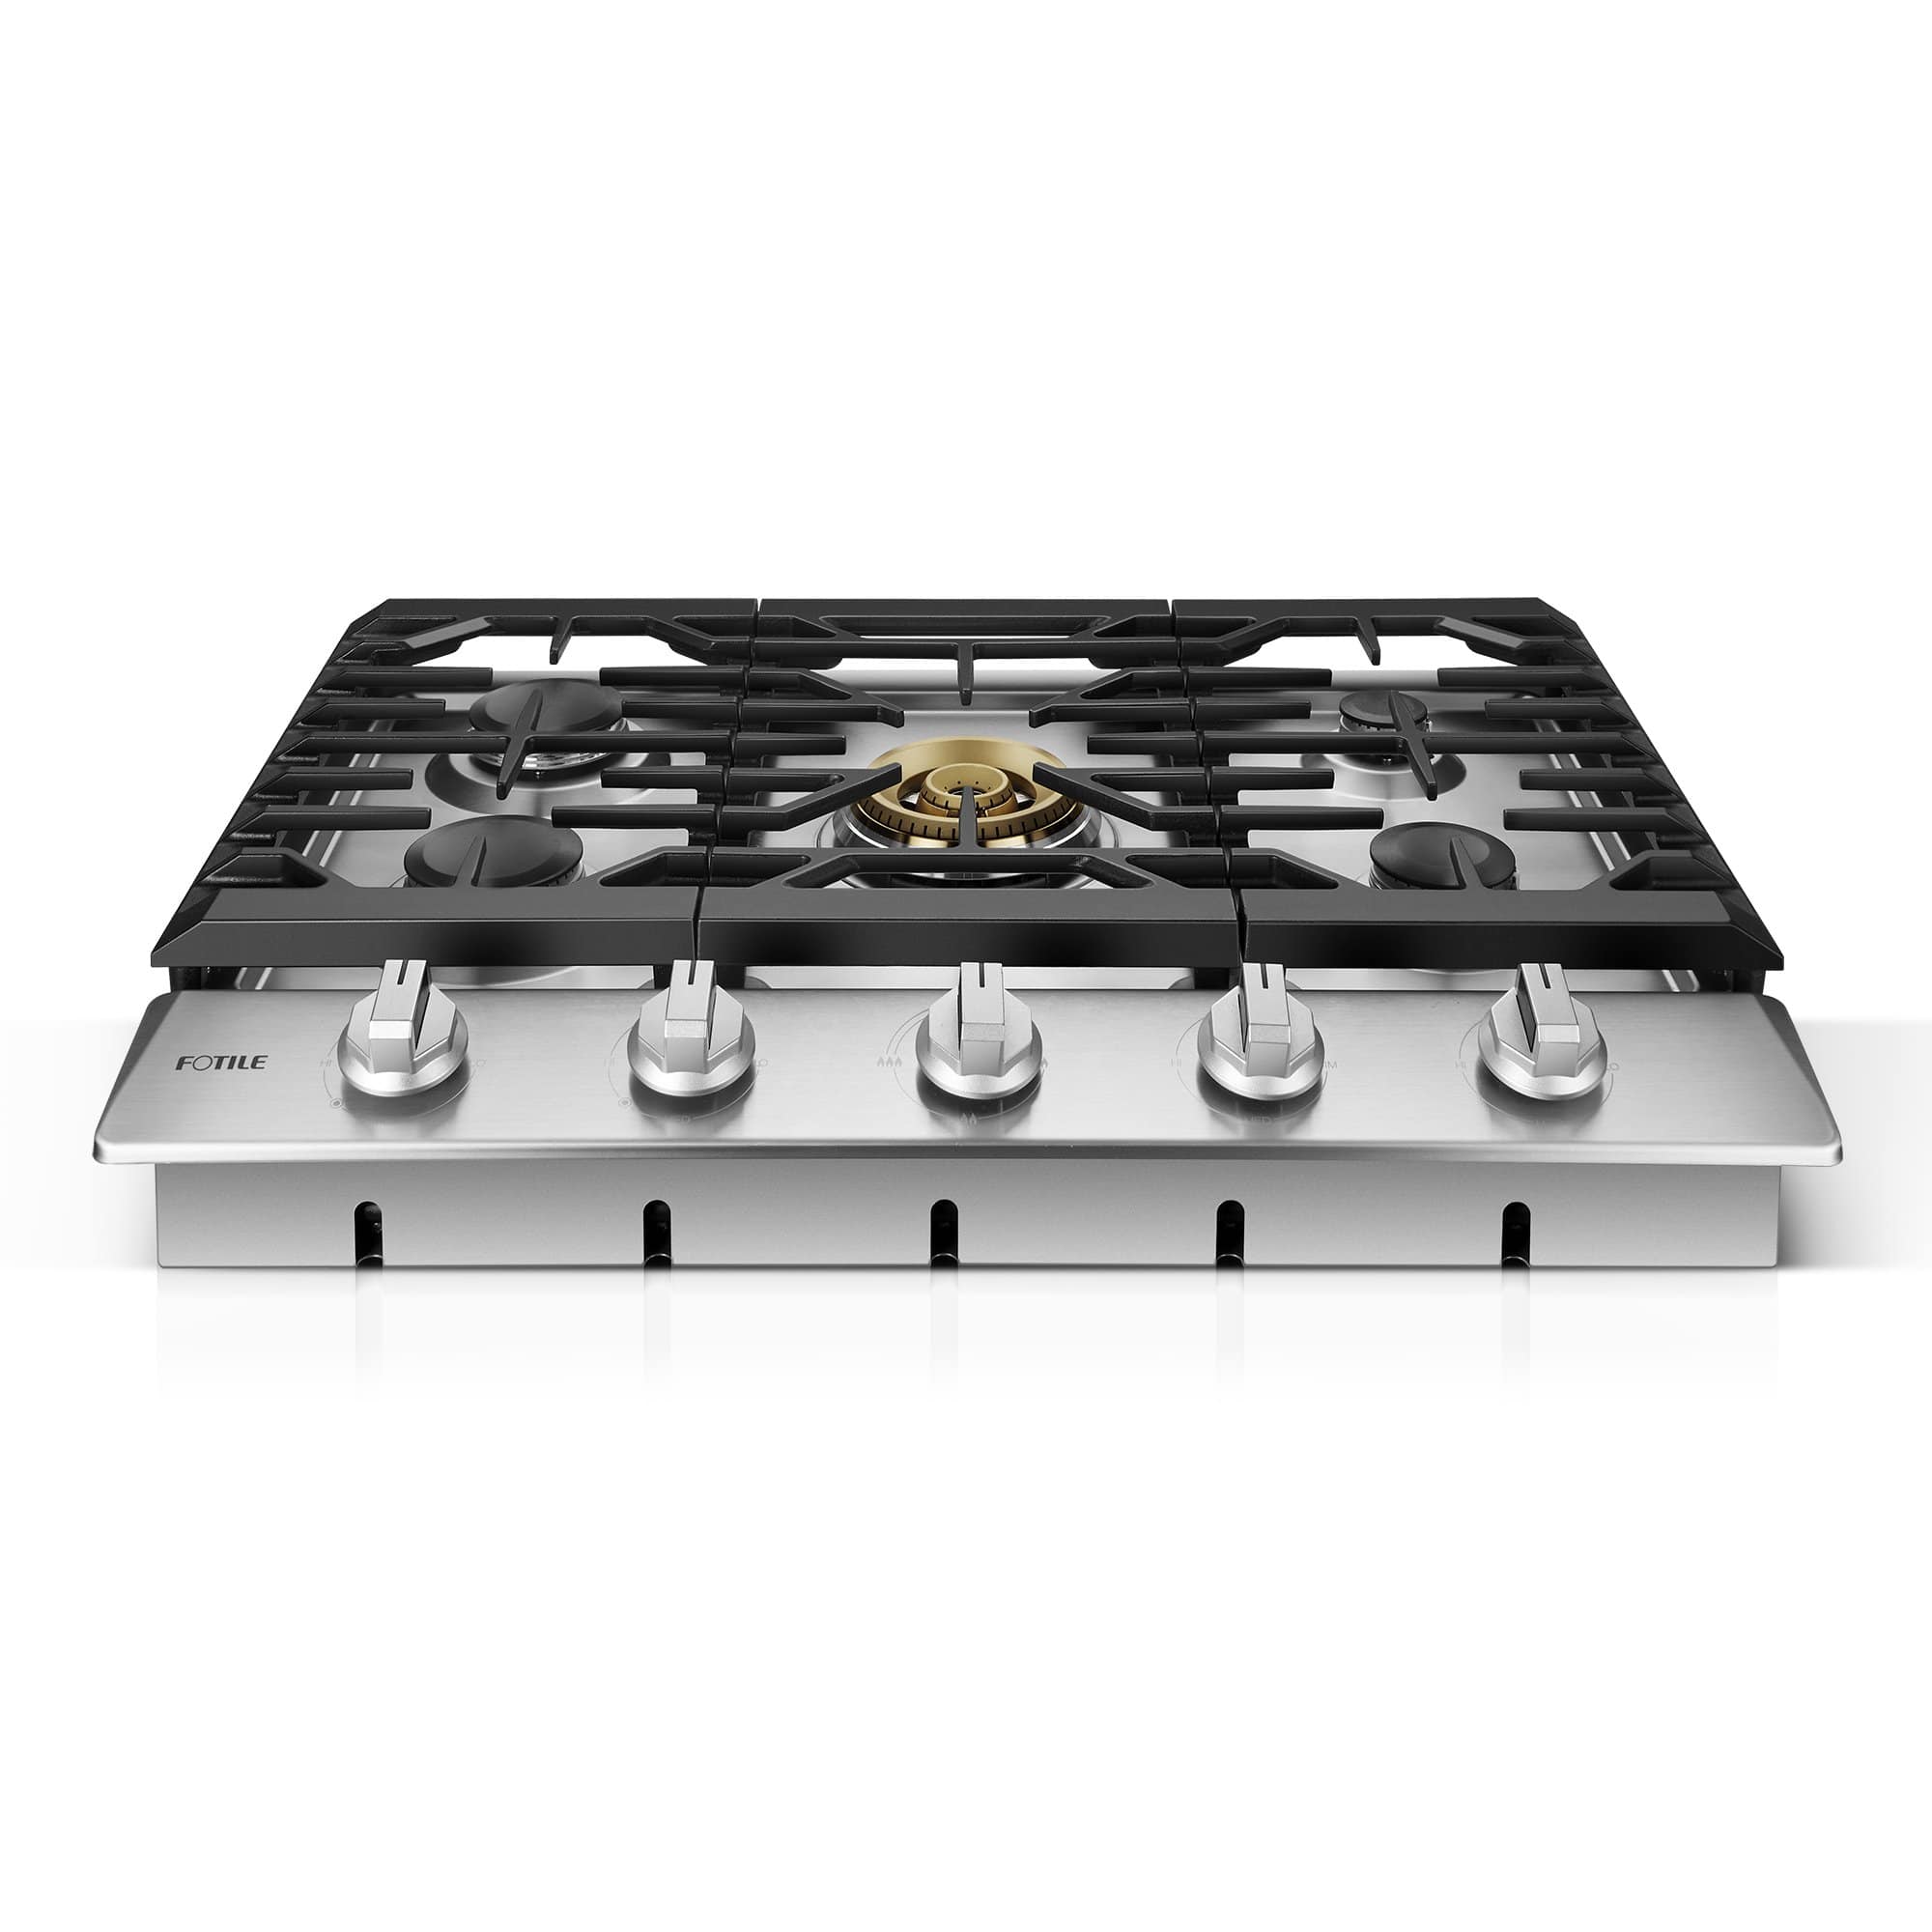 Trifecte Galway 36 in. GAS Cooktop in Stainless Steel with 5 Burners Including Power Burners and Cast Iron Griddle, Silver